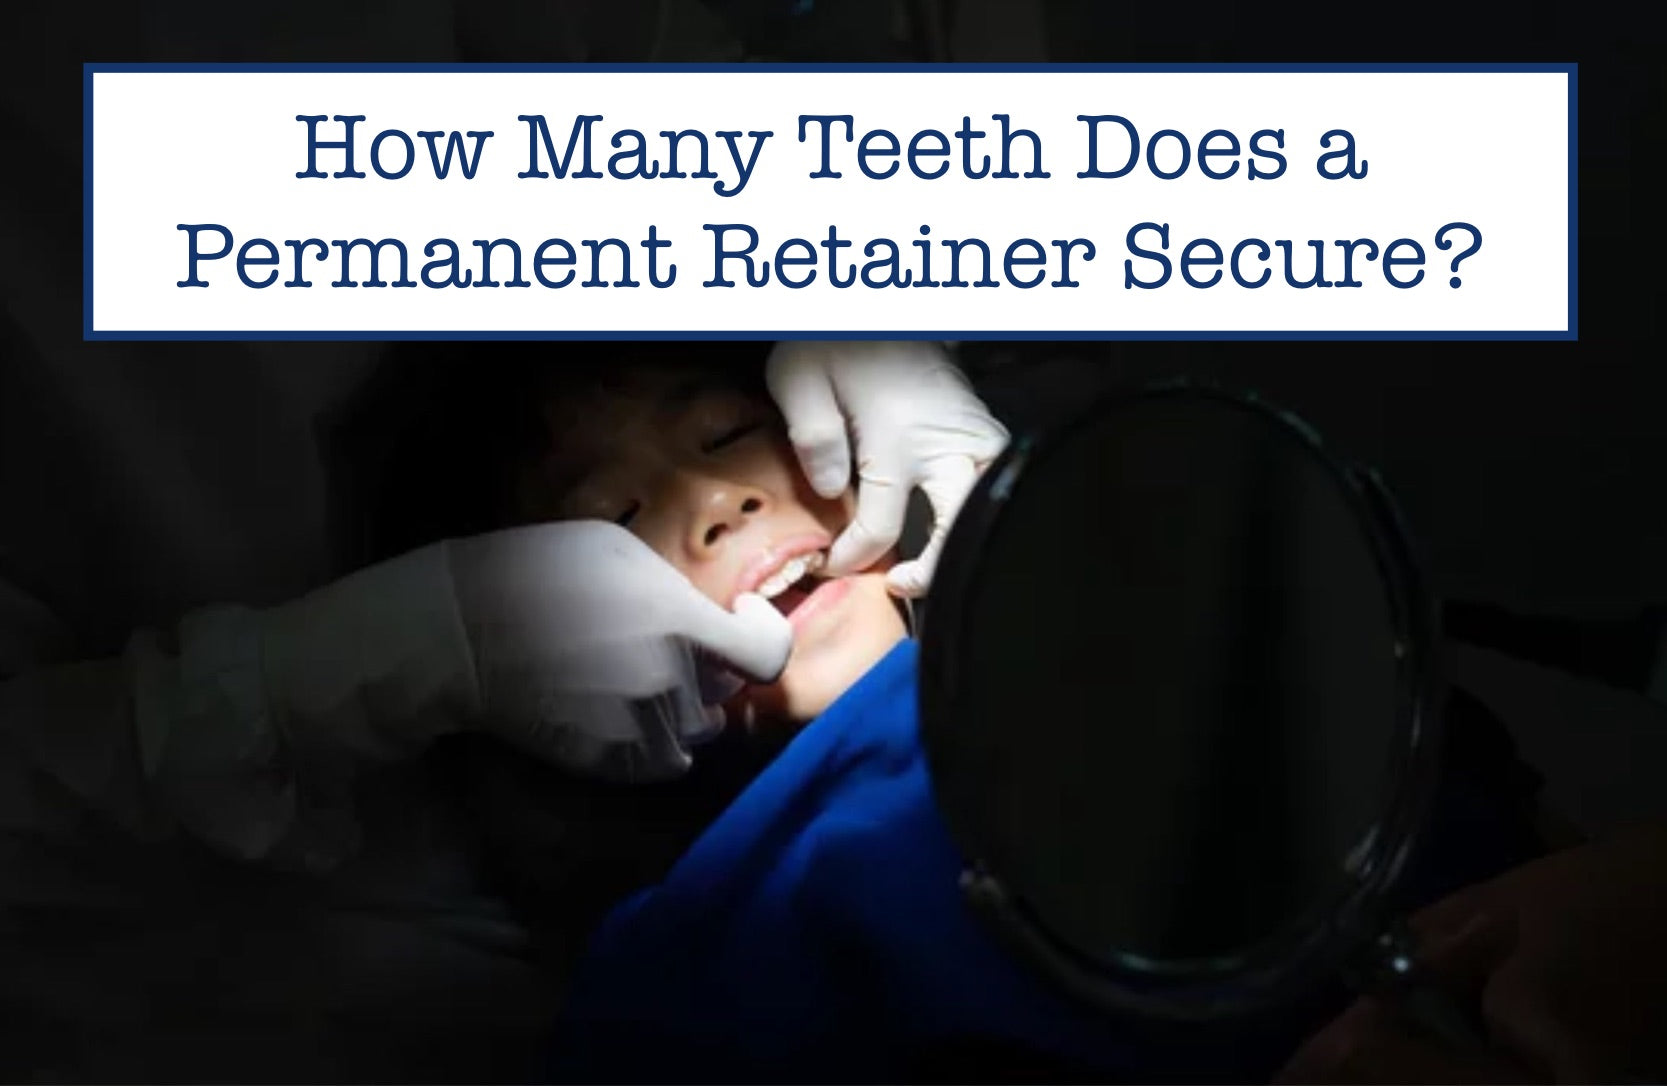 How Many Teeth Does a Permanent Retainer Secure?